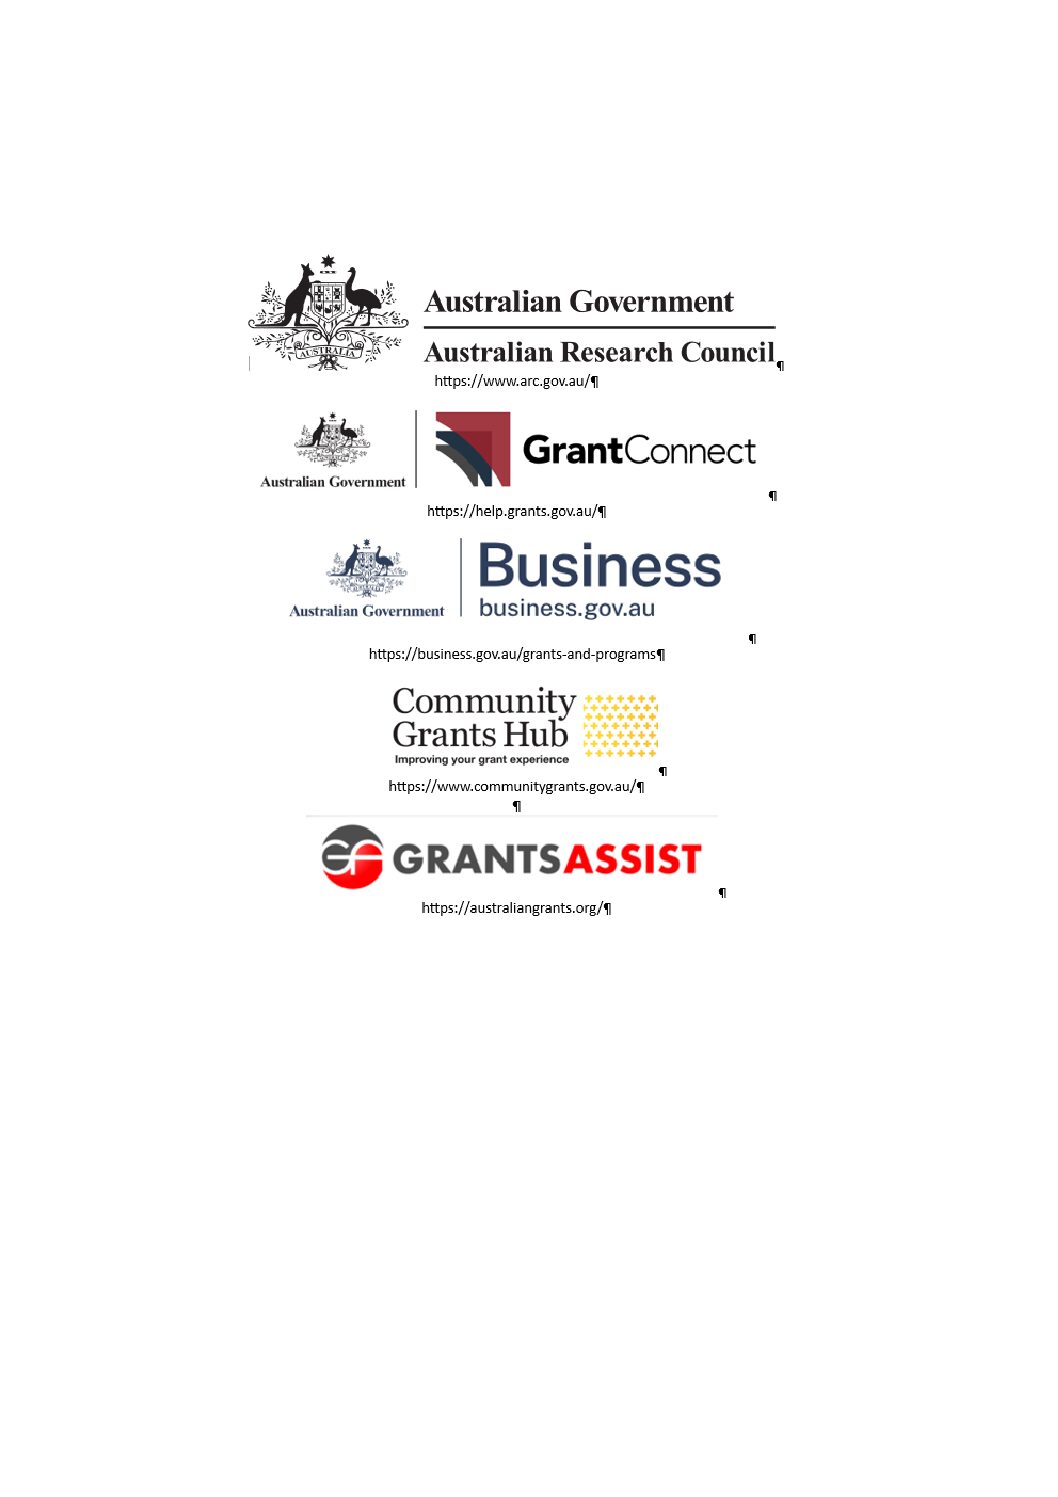 Australian Government Grants that bring Australian products to the World